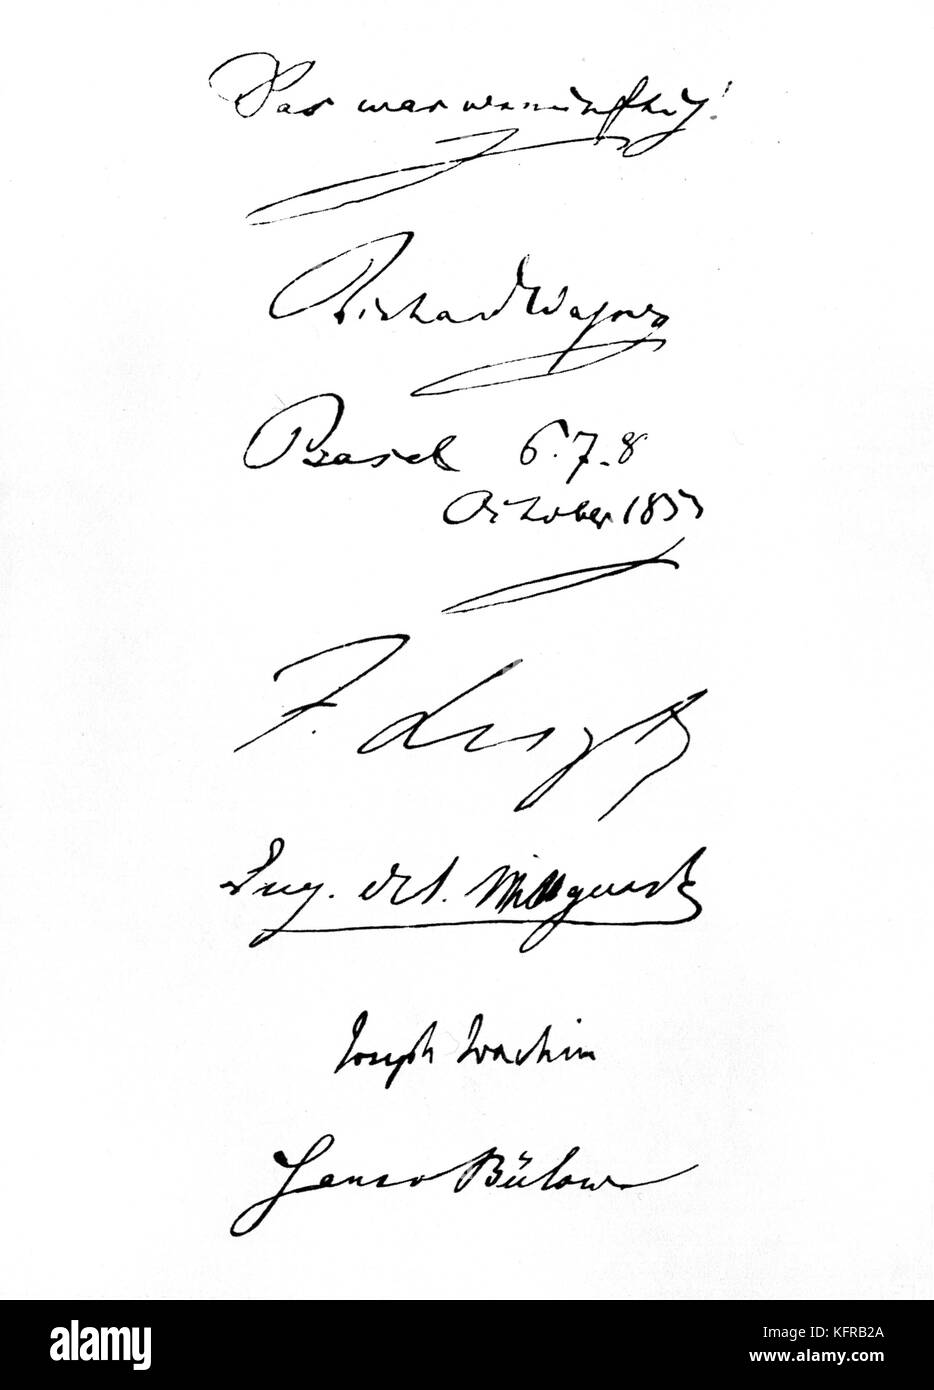 Princess Carolyne von Sayn-Wittgenstein 's album - souvenir page of signatures. In October 1853, Sayn- Wittgenstein, her daughter Marie, Franz Liszt and Joachim and Hans von Bülow met Richard Wagner in Basel.  CSW: Polish noblewoman and writer, partner of Franz Liszt,  8  February 1819 – 9  March 1887. FL: Hungarian pianist and composer,  22 October 1811 - 31 July 1886. RW: German composer & author, 22 May 1813 - 13 February 1883. Stock Photo